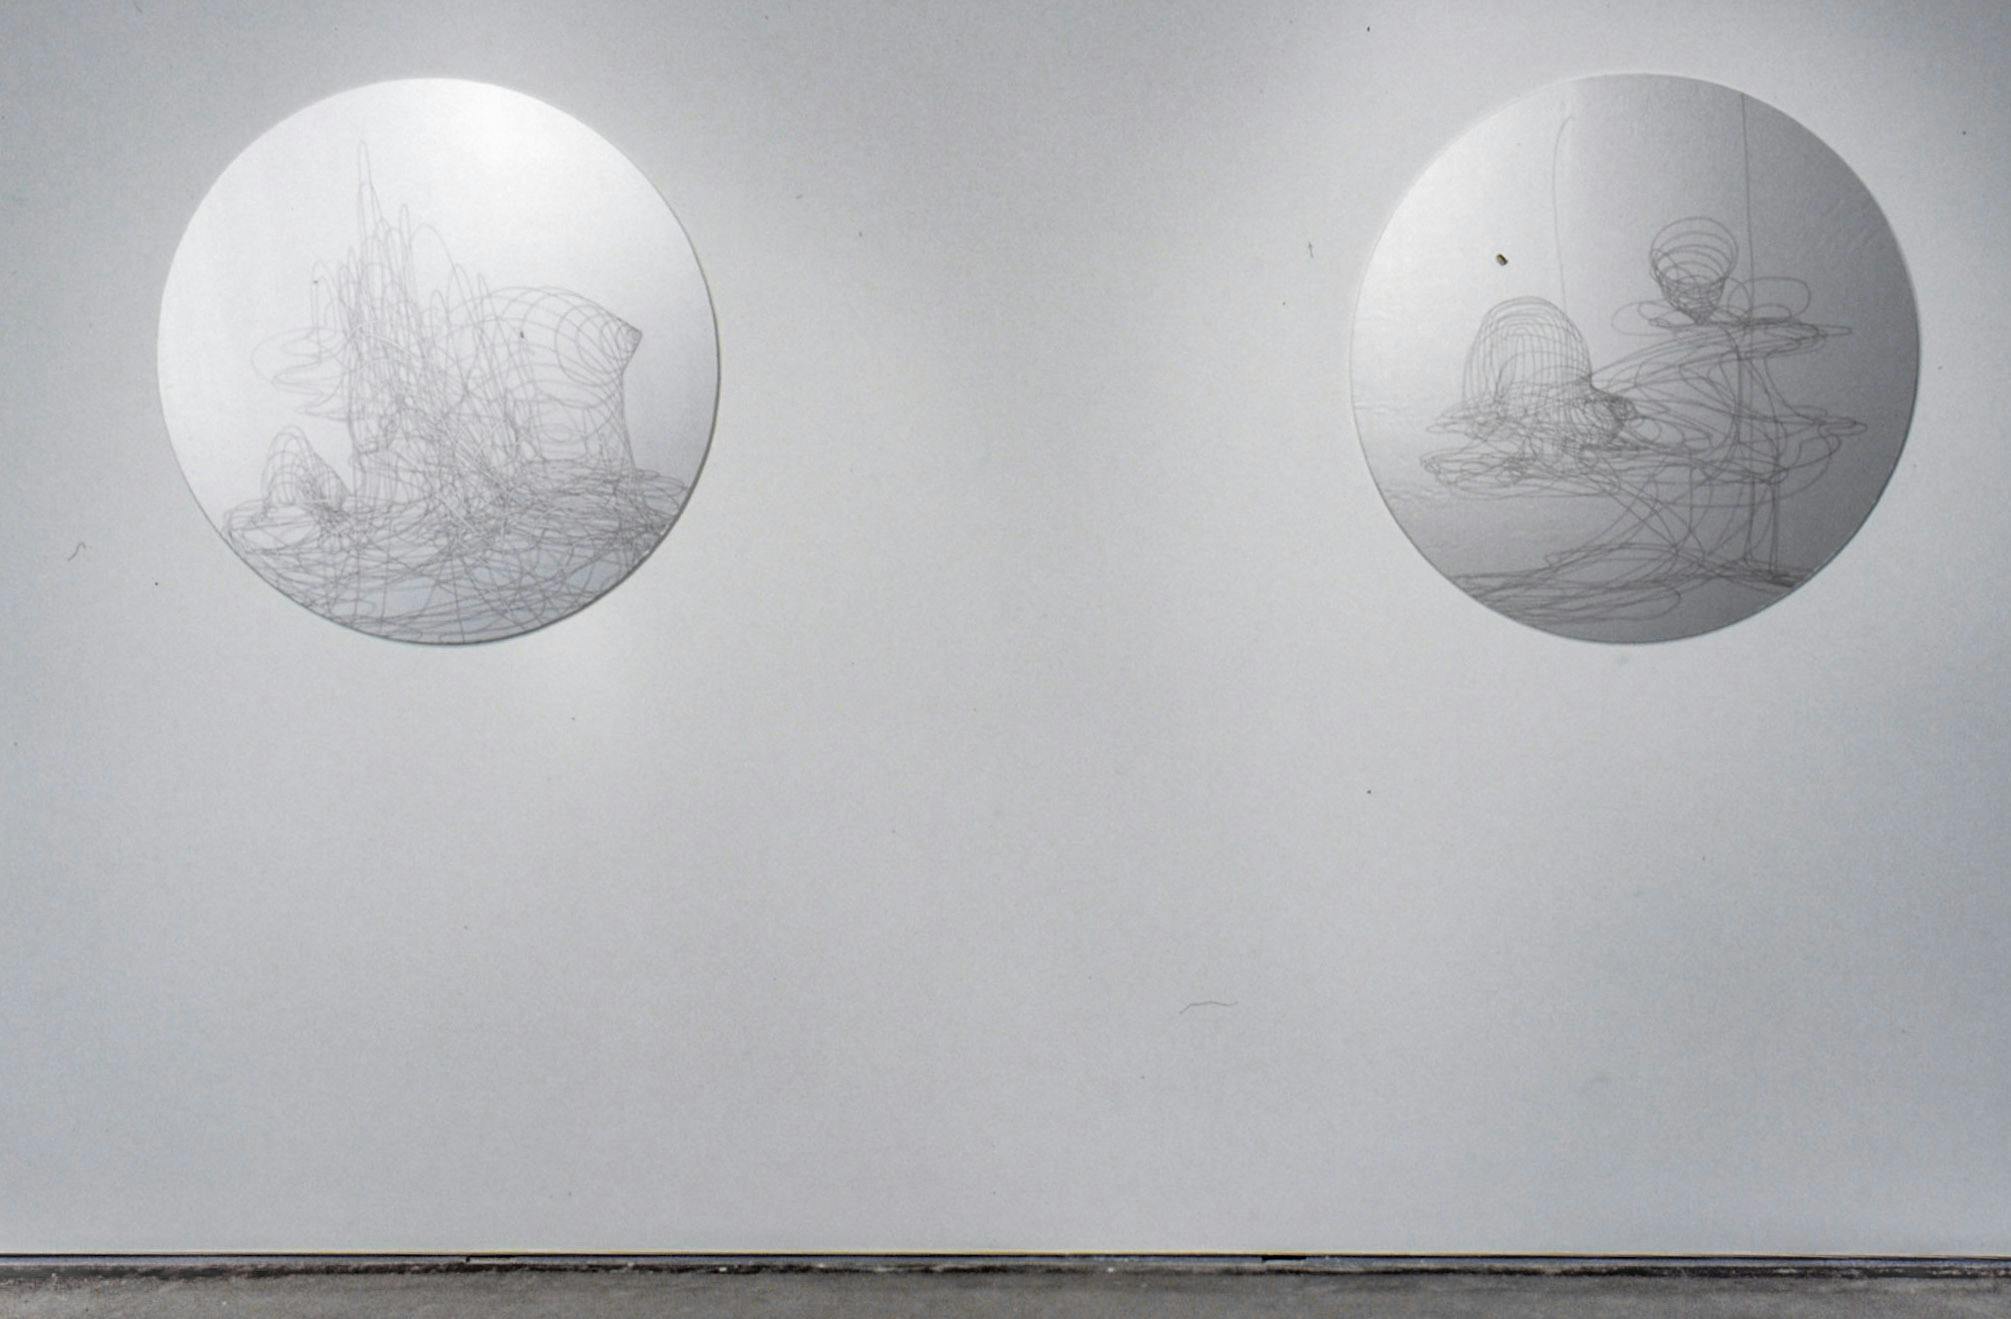 Two circular shaped sculptures are mounted on the gallery wall. They both have a silver metallic surface, on which some abstract line drawings are made. 